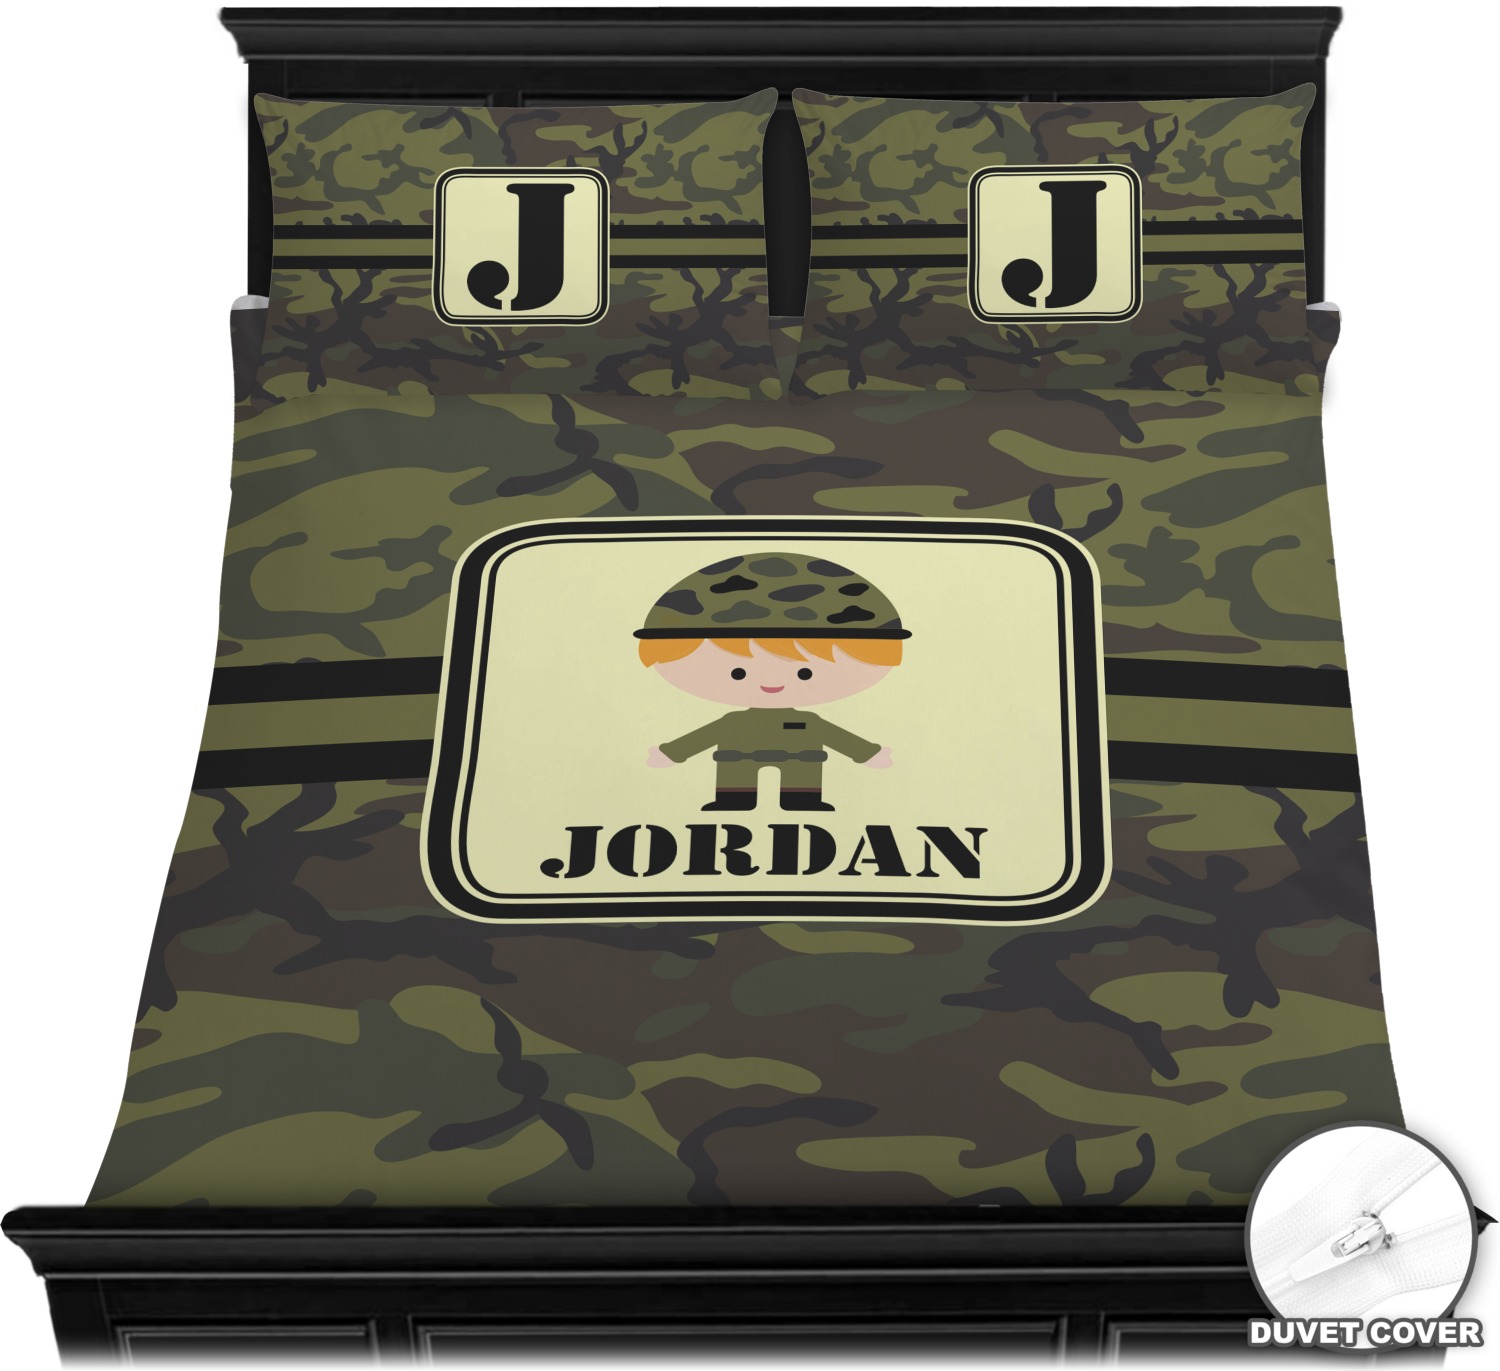 Green Camo Duvet Covers Personalized Youcustomizeit